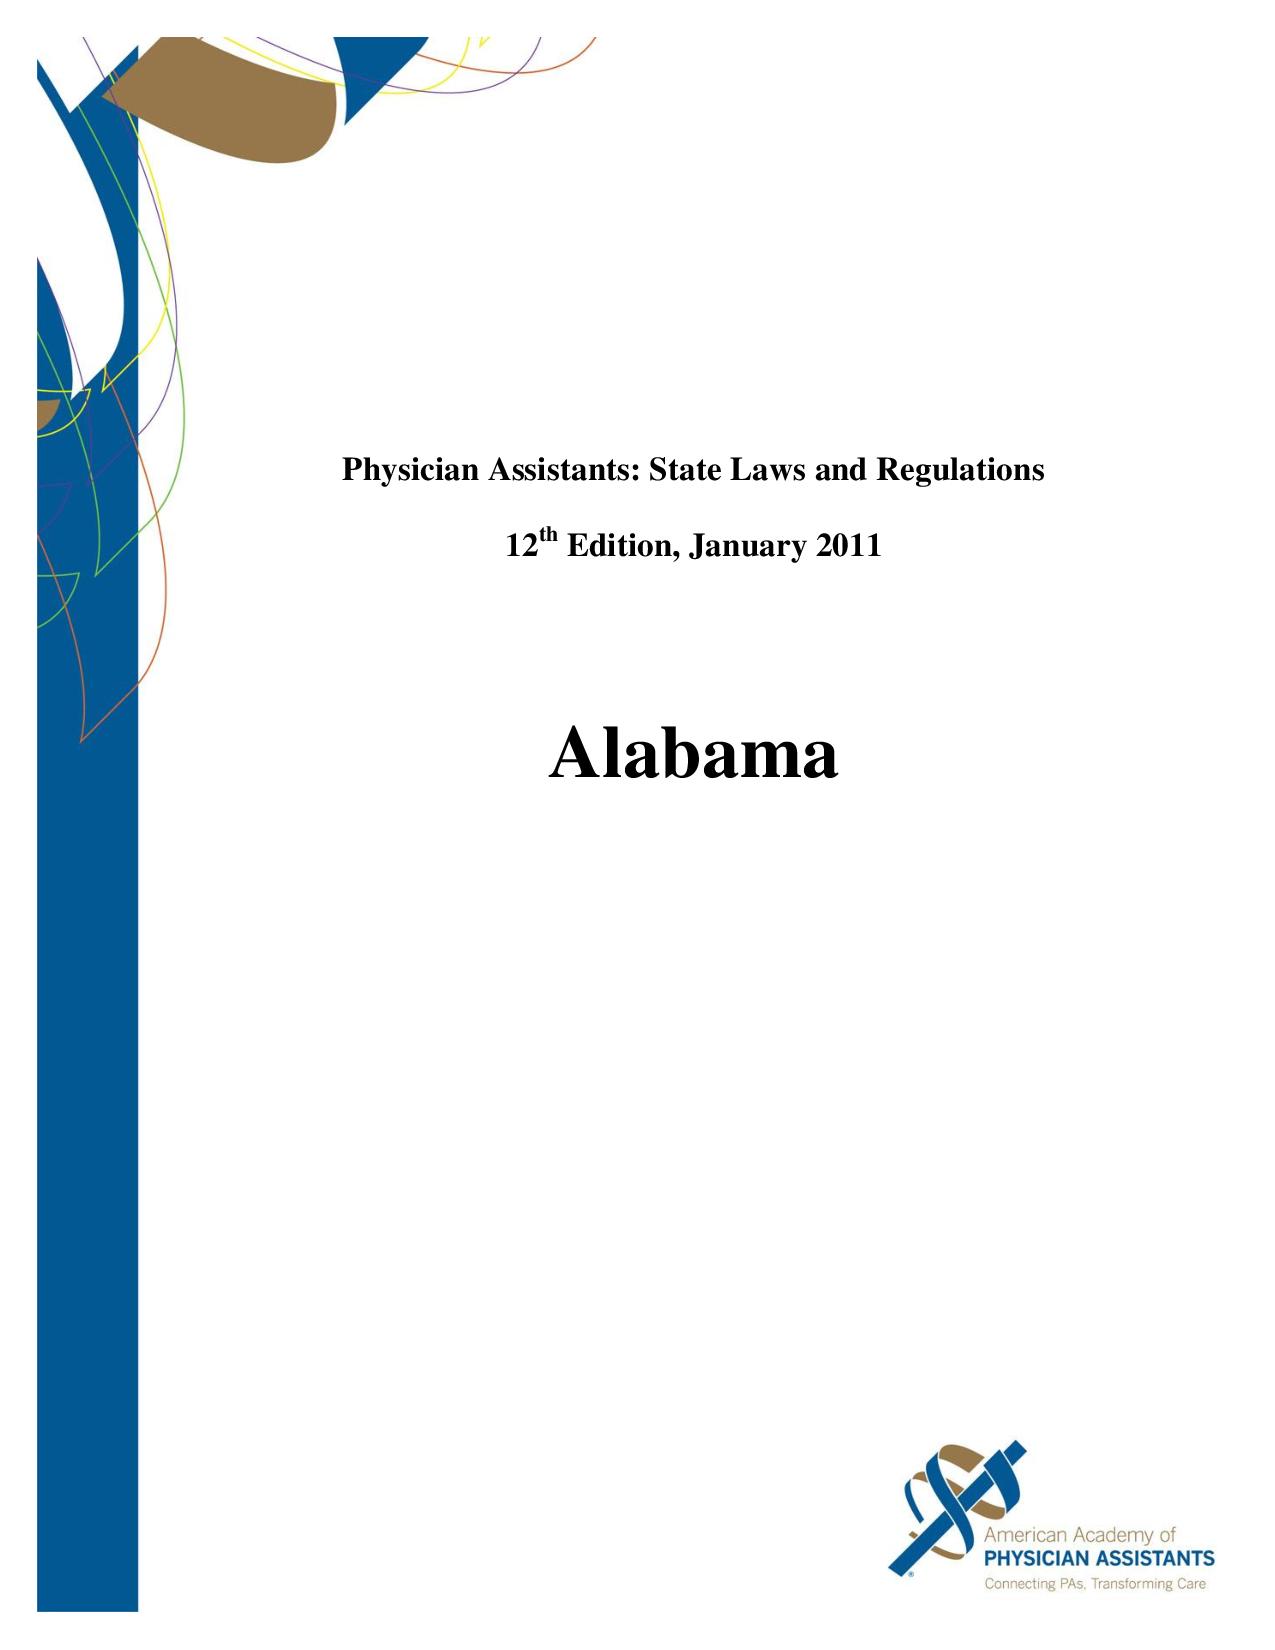 PA State Laws and Regulations 12th Edition